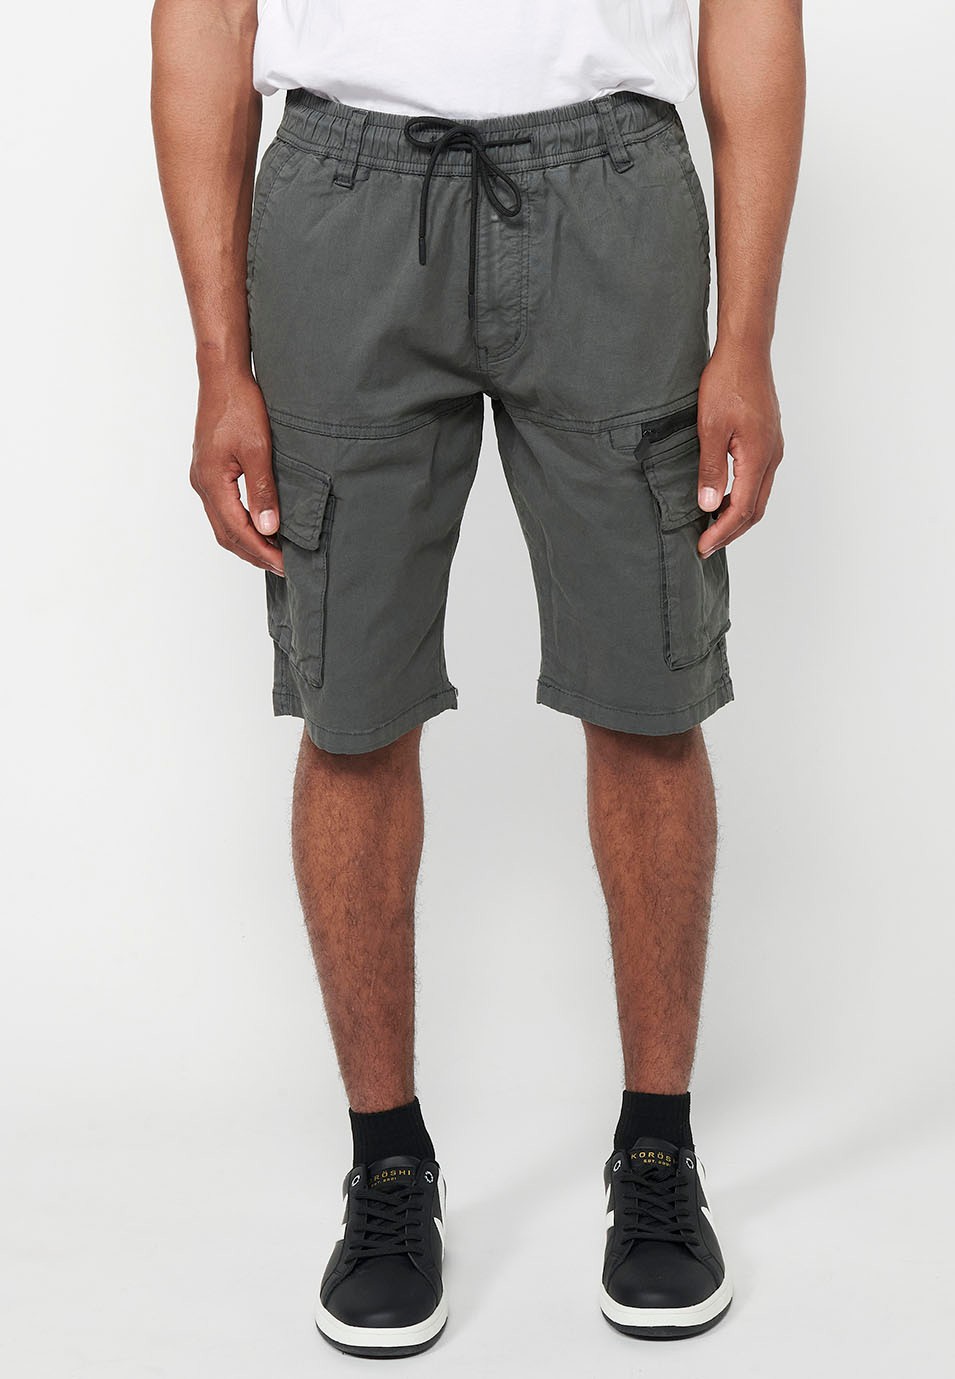 Cargo shorts with side pockets with flap and front closure with zipper and button Color Gray for Men 2